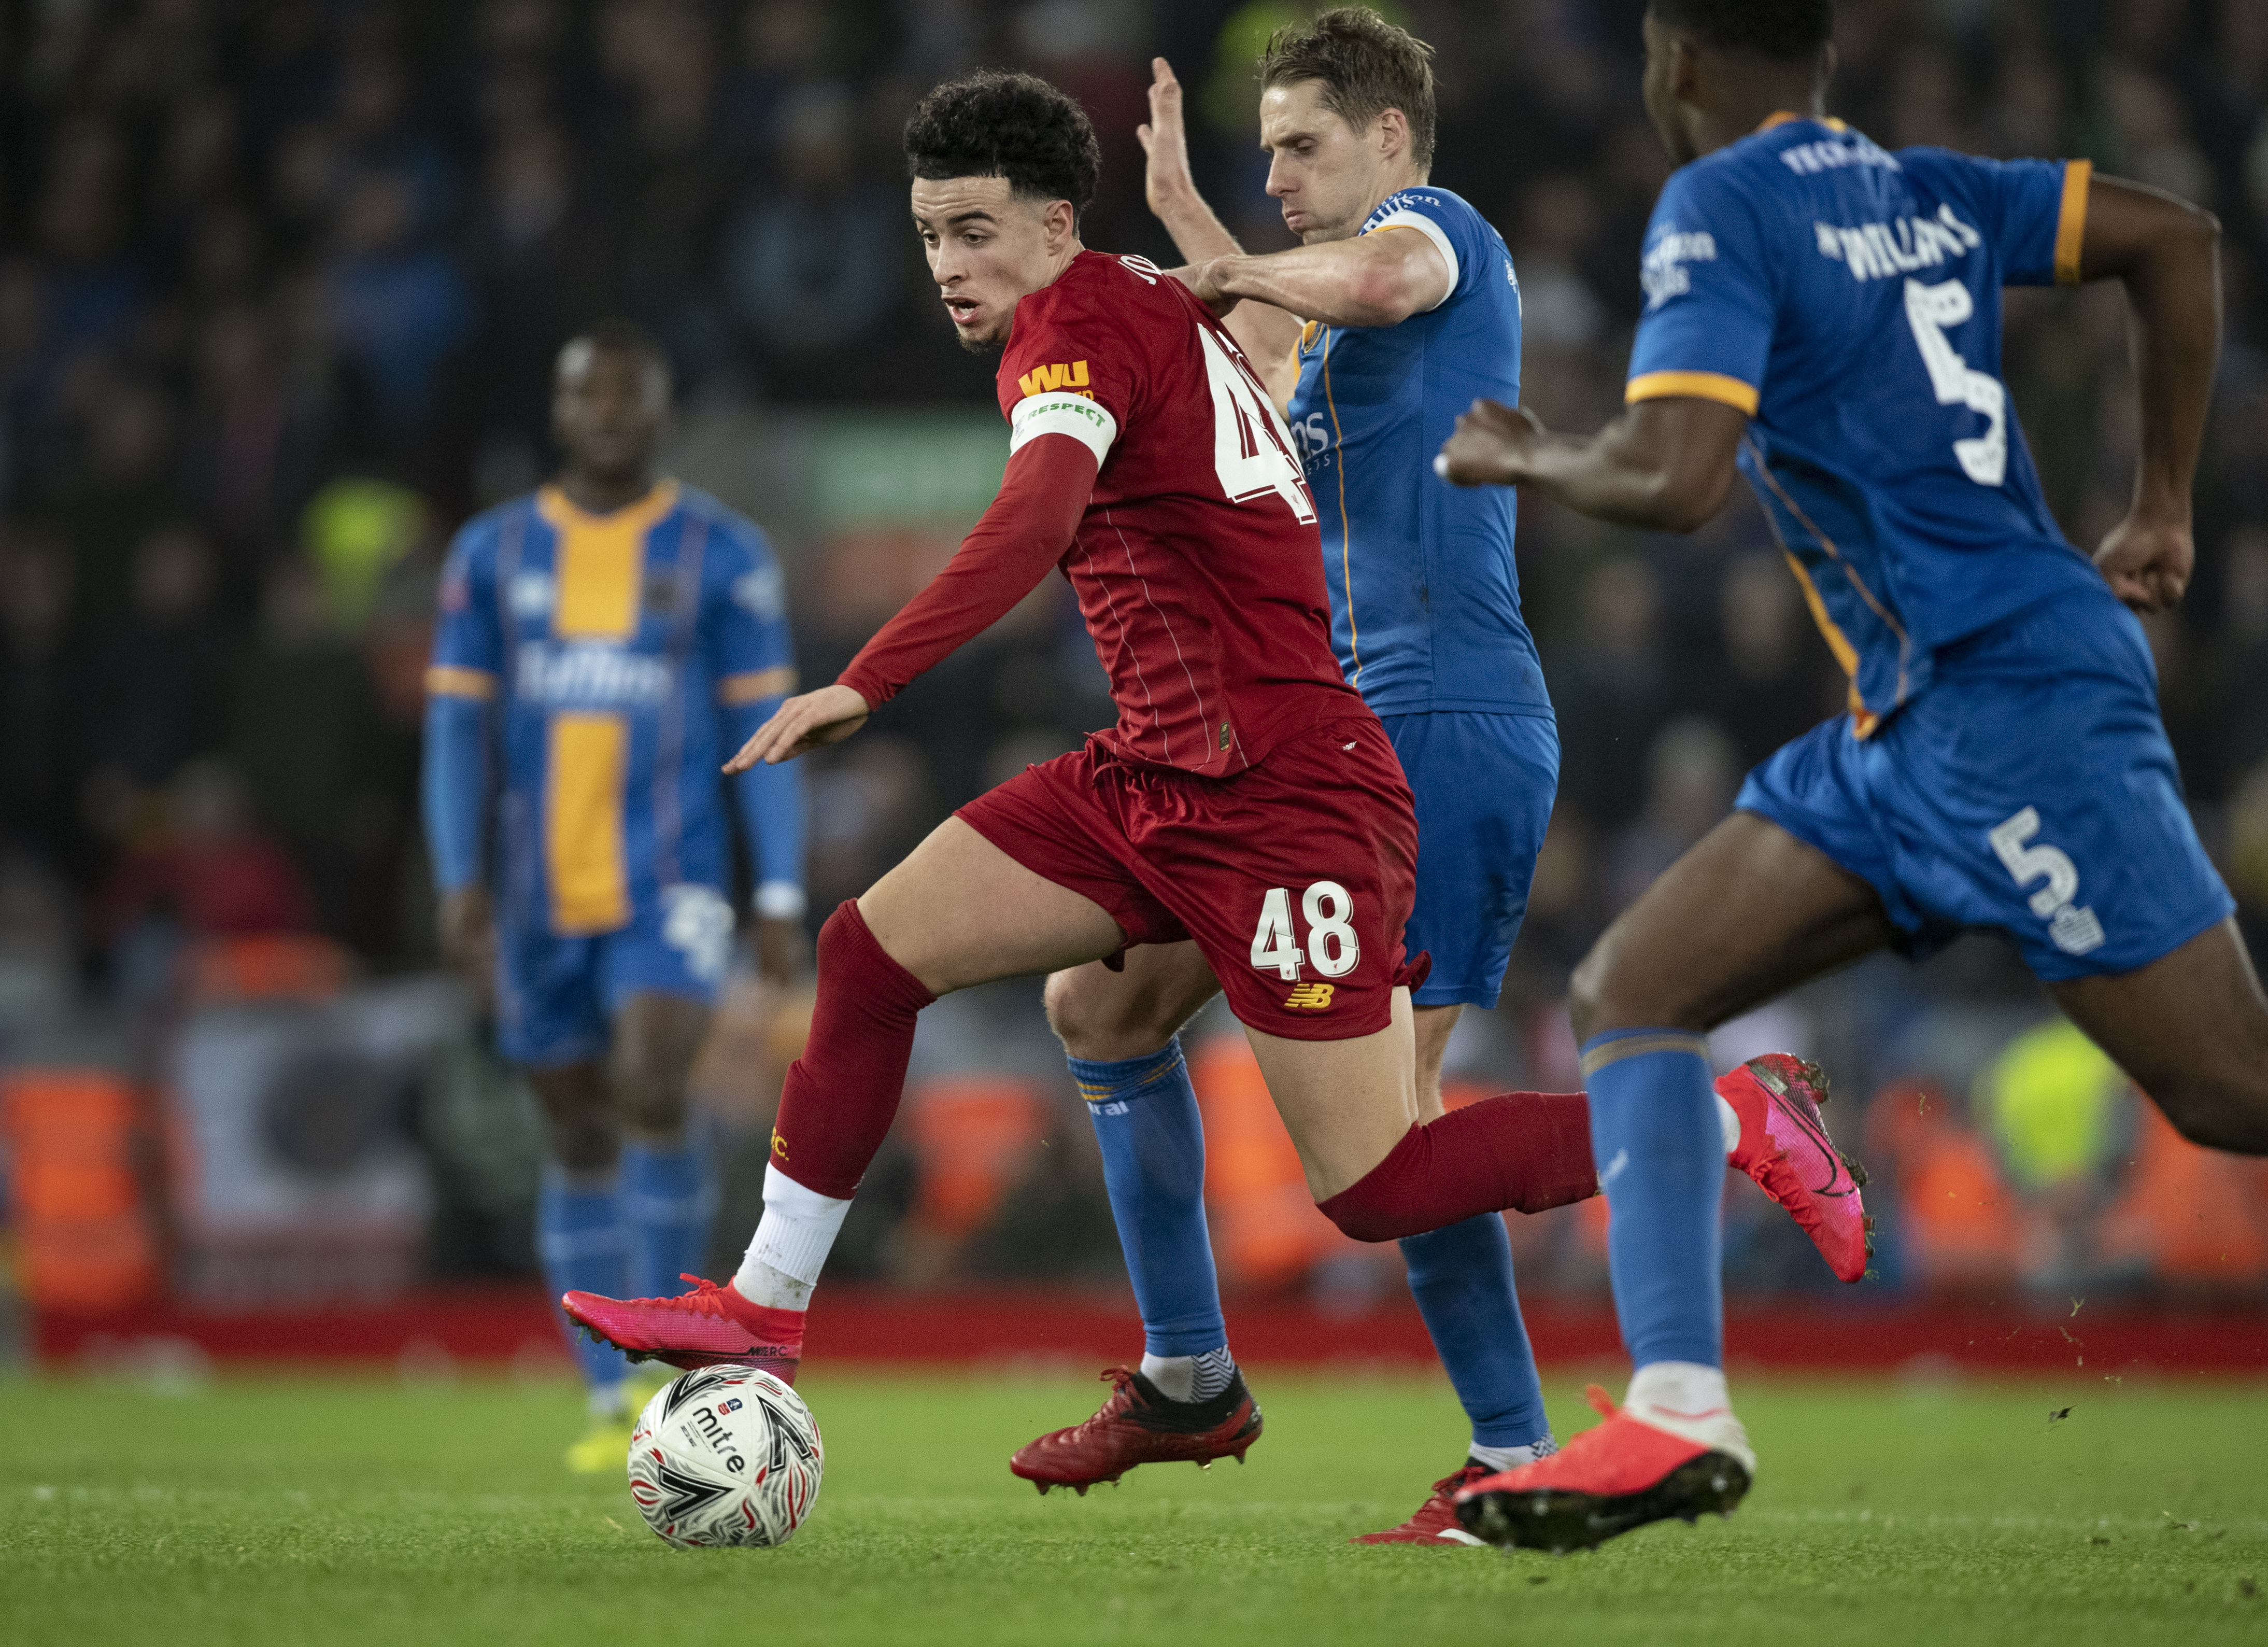 Curtis Jones of Liverpool and David Edwards of Shrewsbury Town in action during the FA Cup Fourth Round Replay match between Liverpool and Shrewsbury Town at Anfield on February 4, 2020 in Liverpool, England.